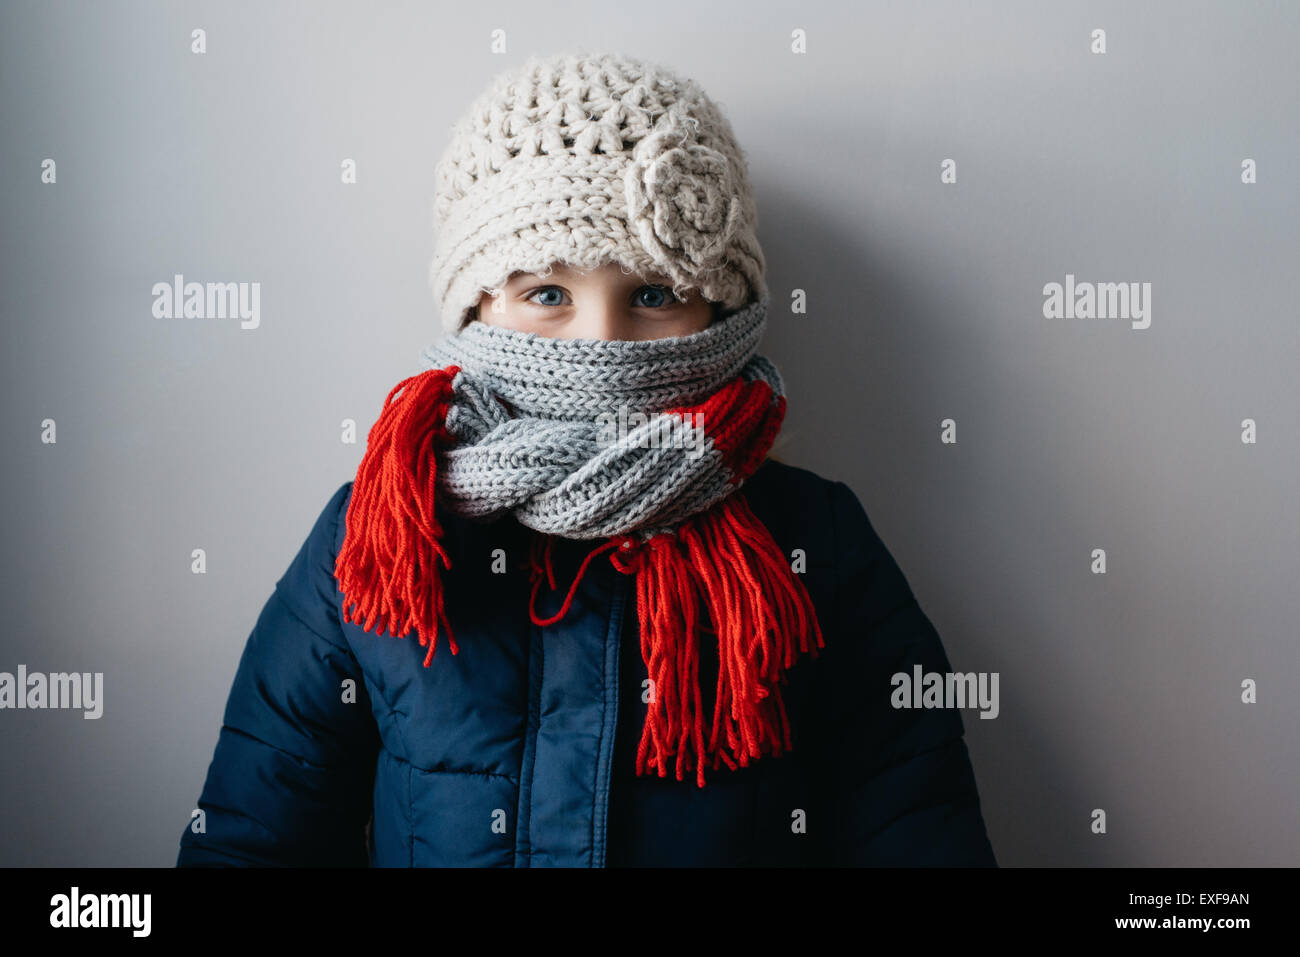 Girl warmly wrapped up in woollen hat and scarf Stock Photo